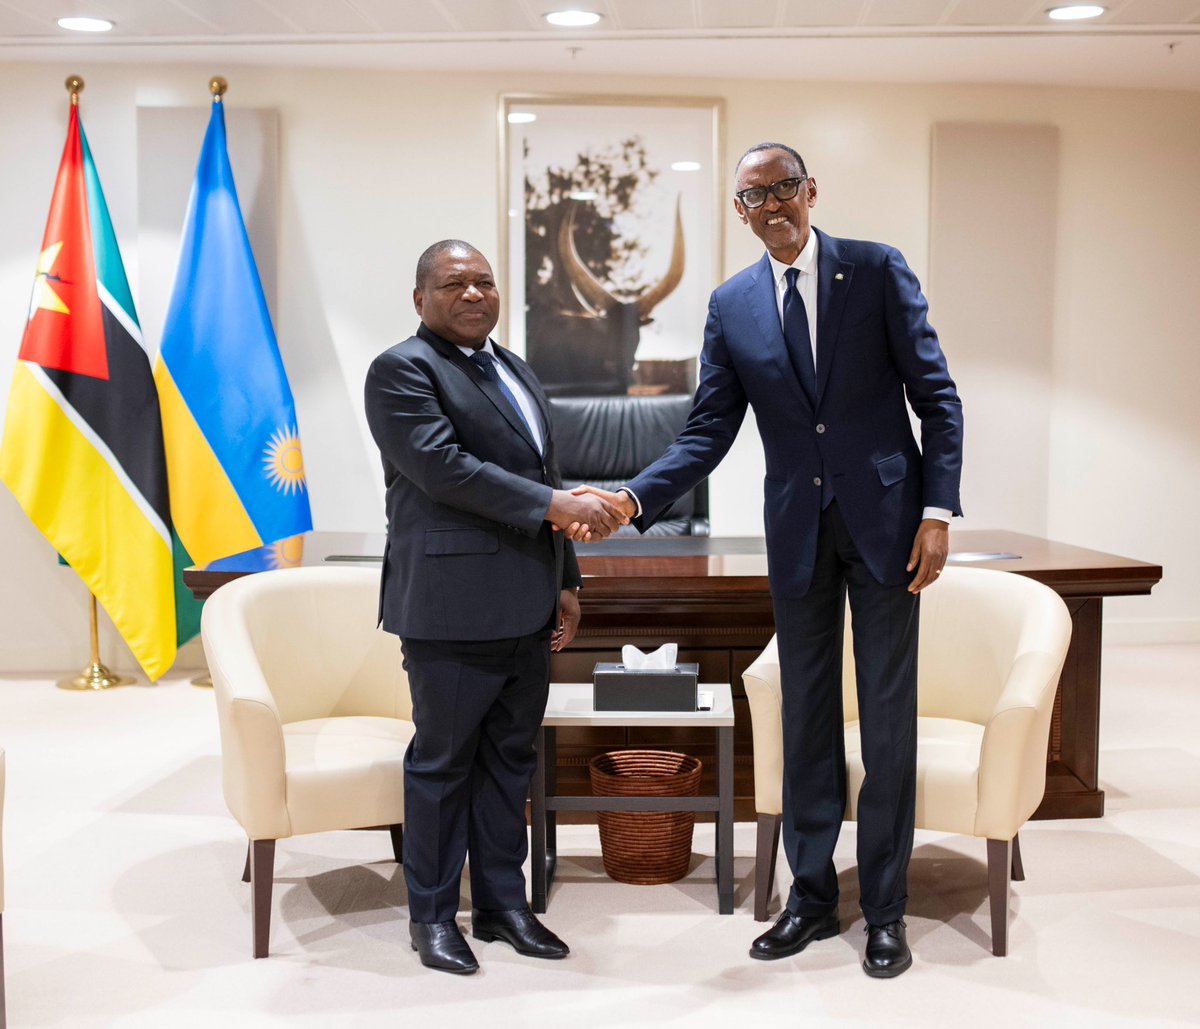 President Kagame met with Guido Brusco, COO of Eni, and Makhtar Diop, MD of IFC, to discuss partnerships. He also engaged with President Filipe Nyusi of Mozambique to strengthen bilateral relations.

#RwandaIsOpen | #ACF2024